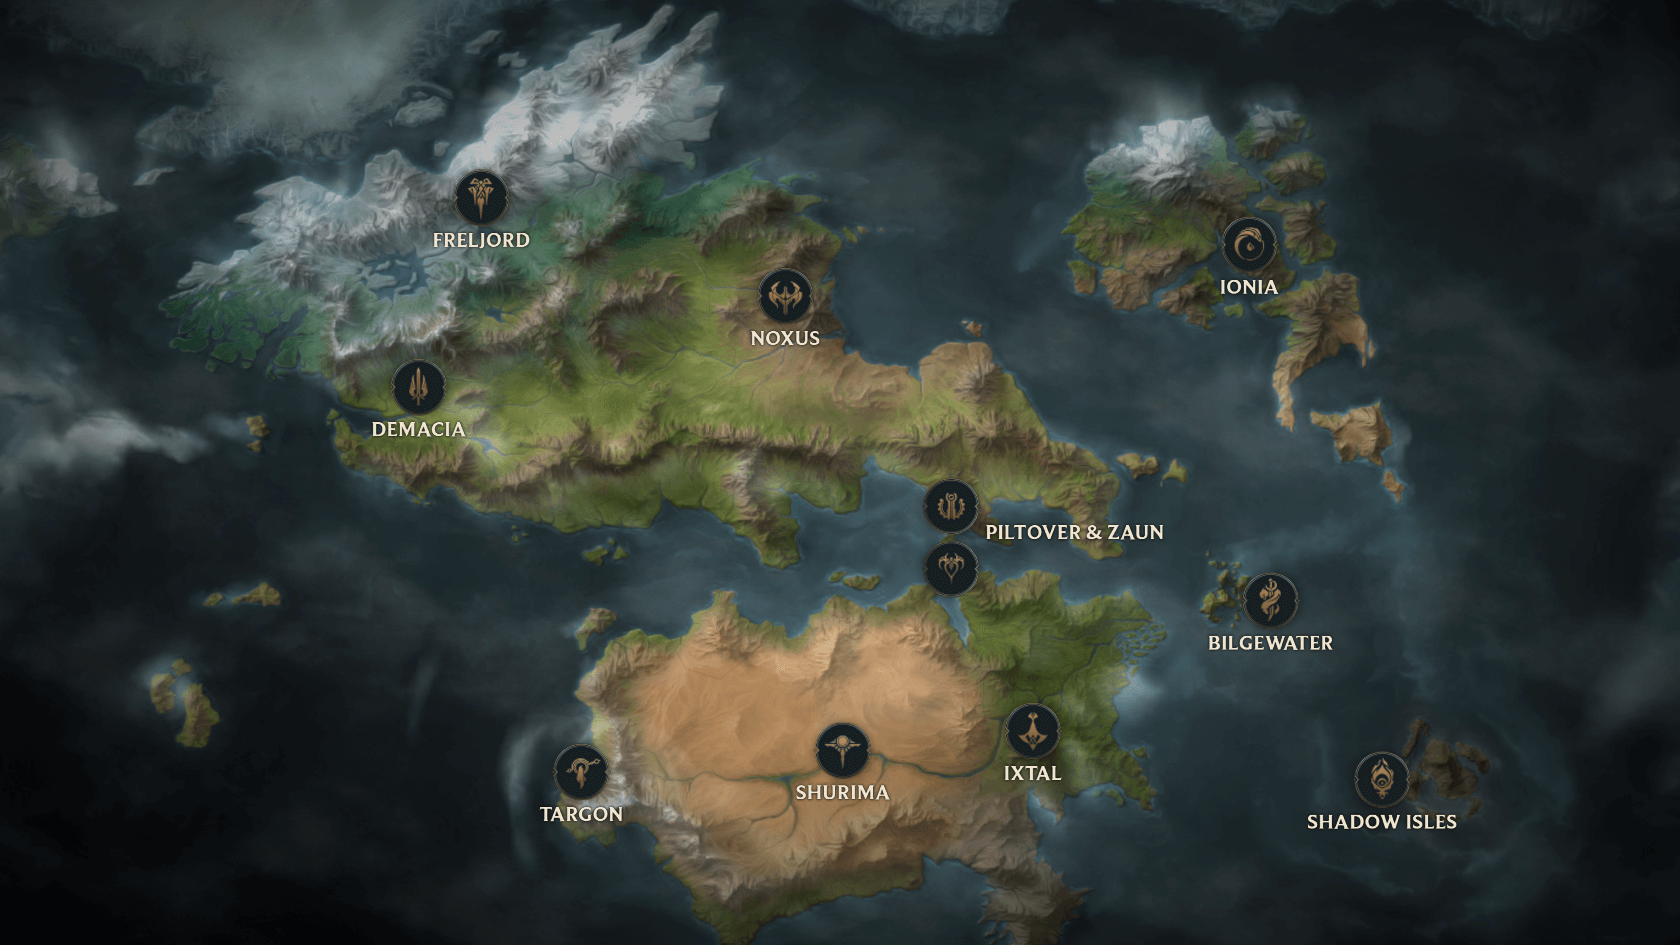 Click for info on lore and locations relating to Riot Games' upcoming MMORPG